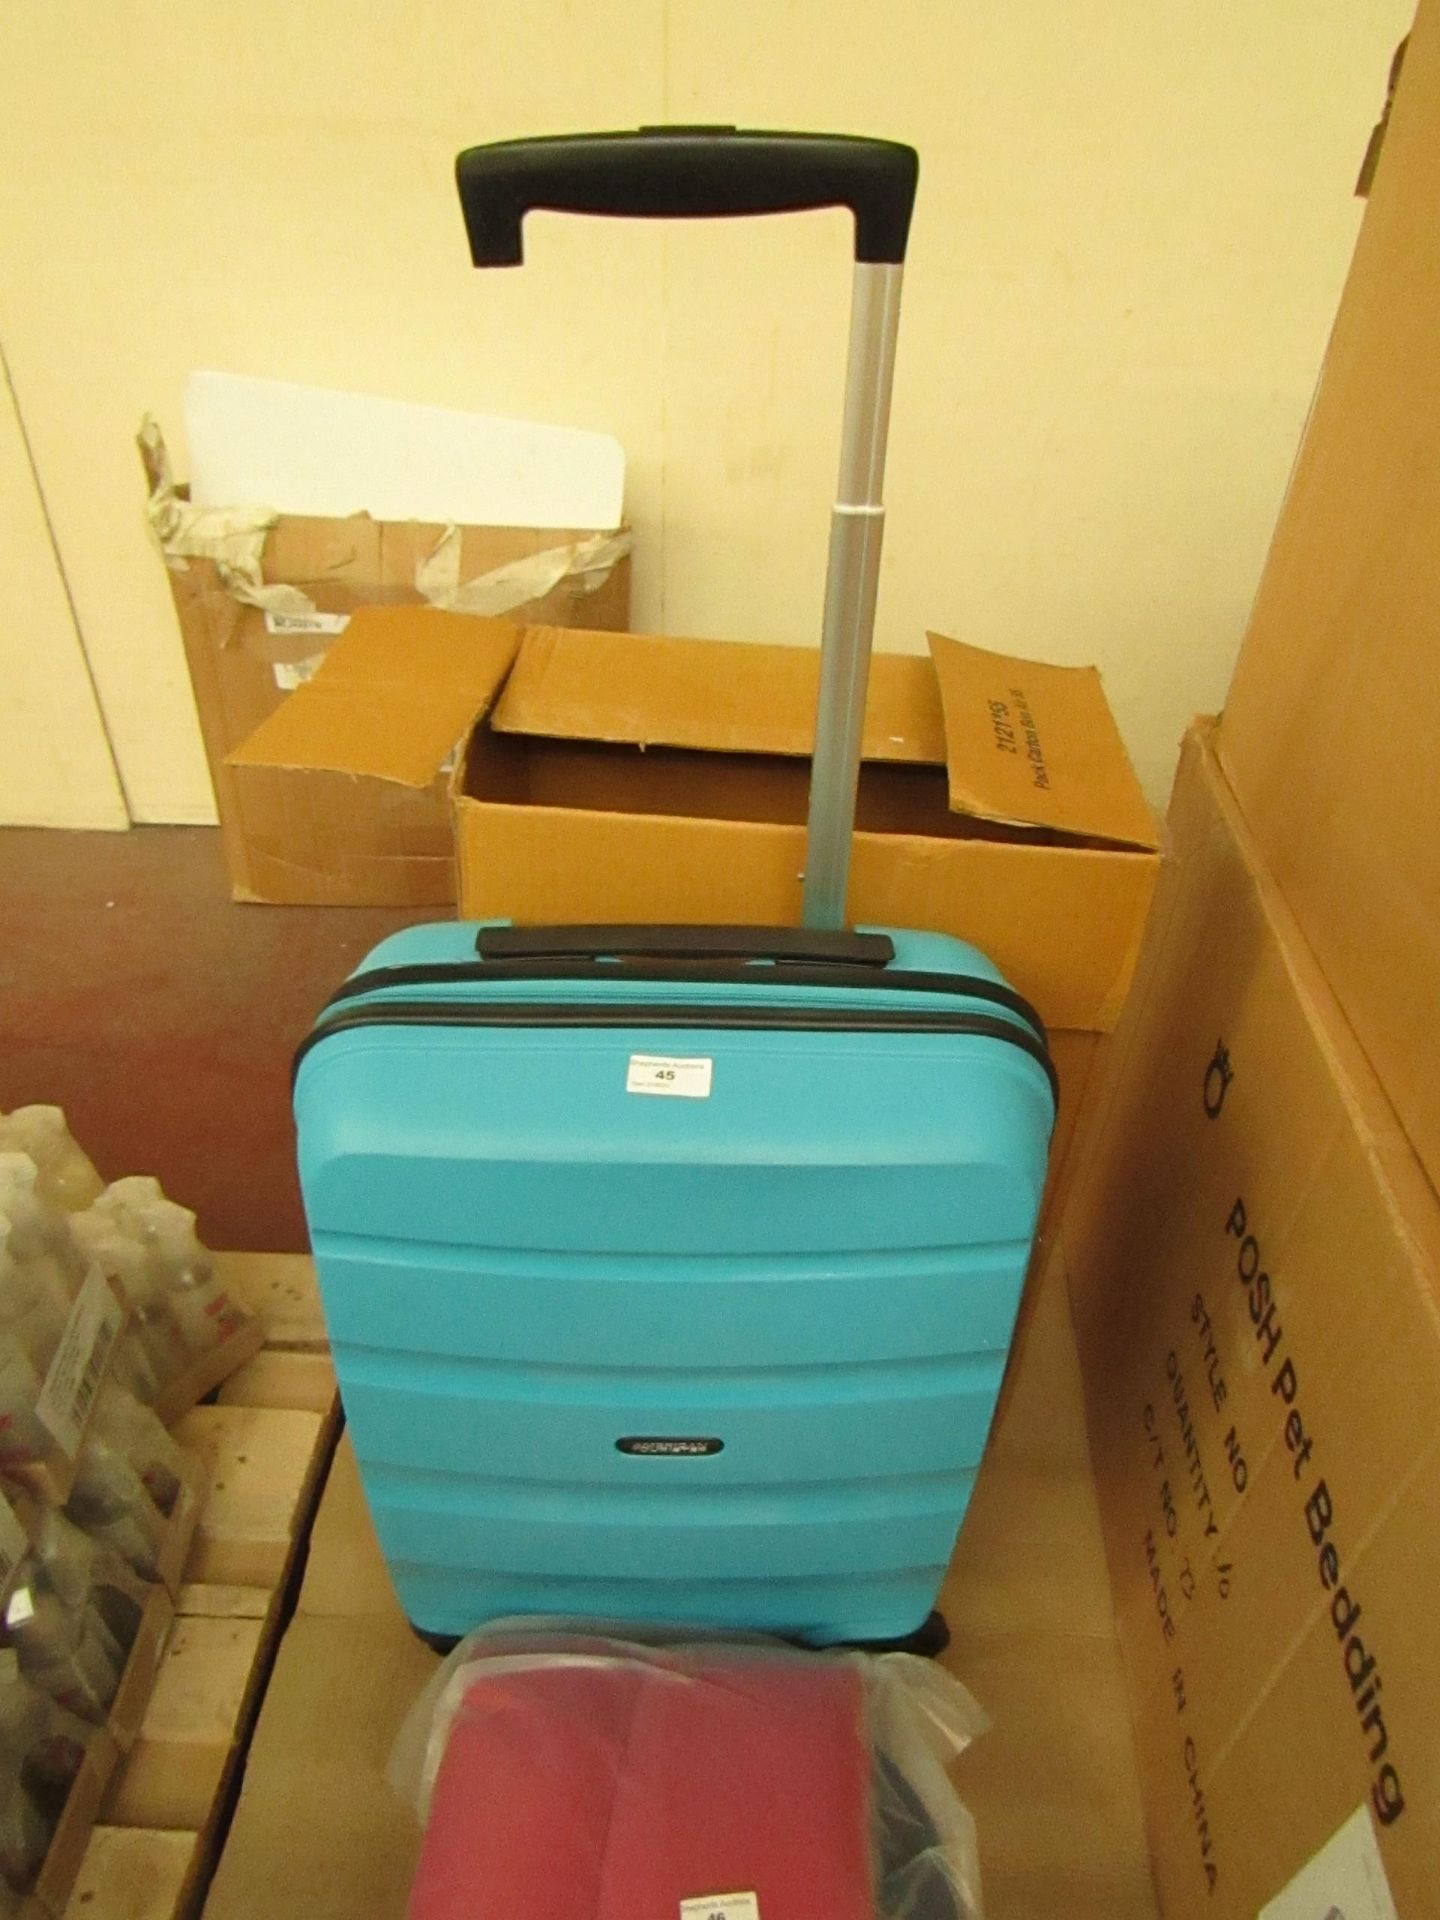 American Tourister Small Suitcase on Wheels With Pull out Handle. Unused & Boxed but the handle need